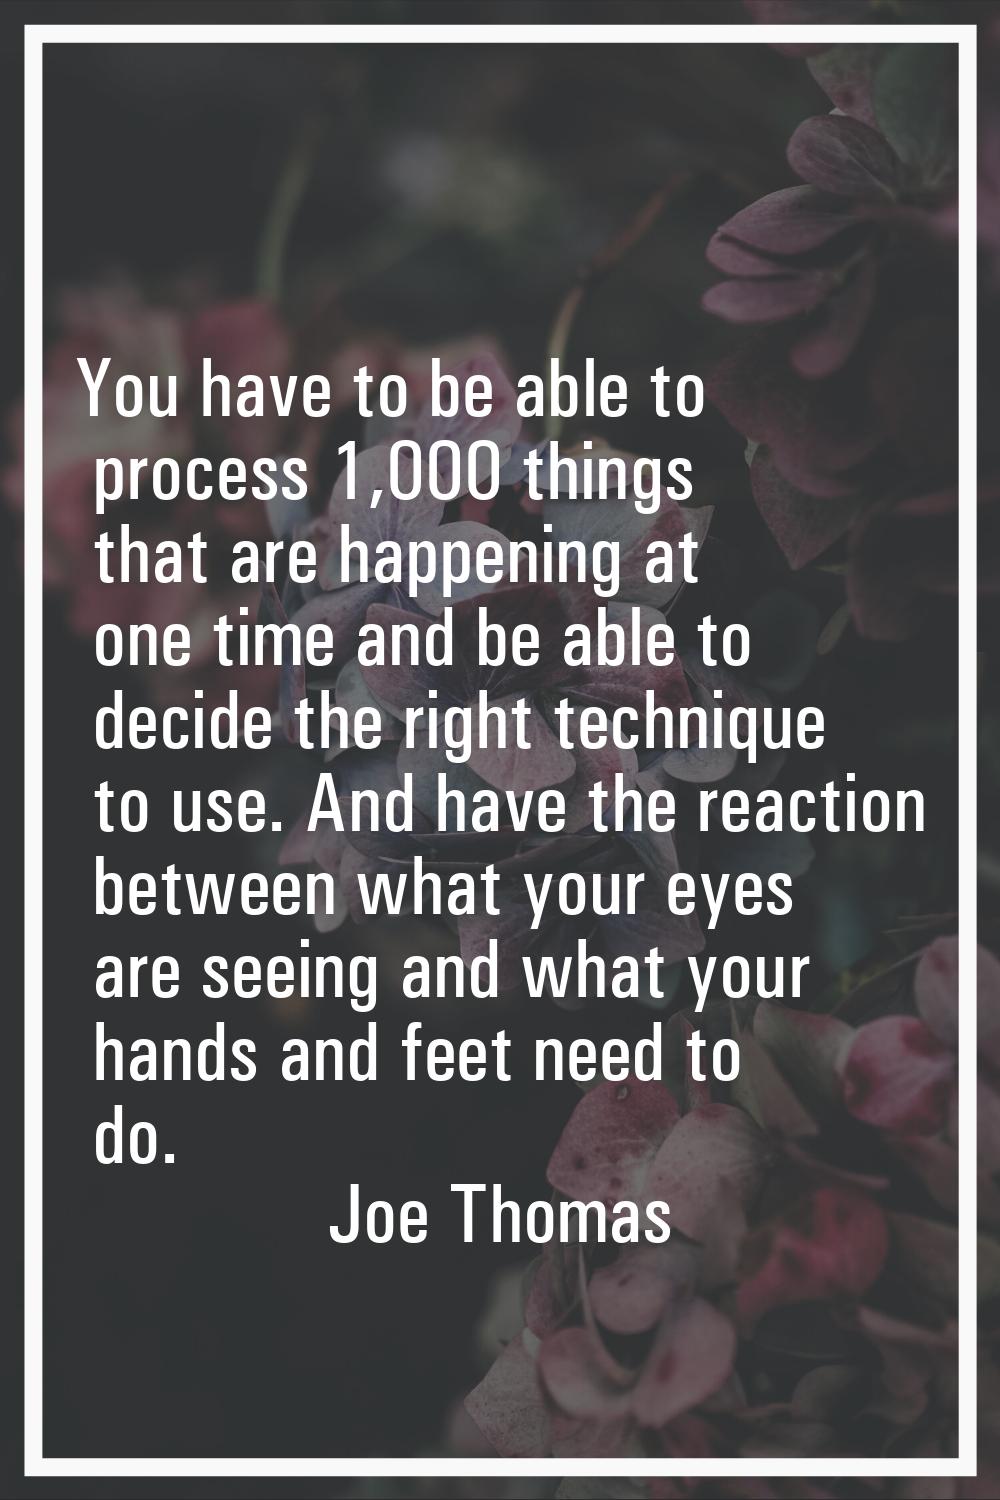 You have to be able to process 1,000 things that are happening at one time and be able to decide th